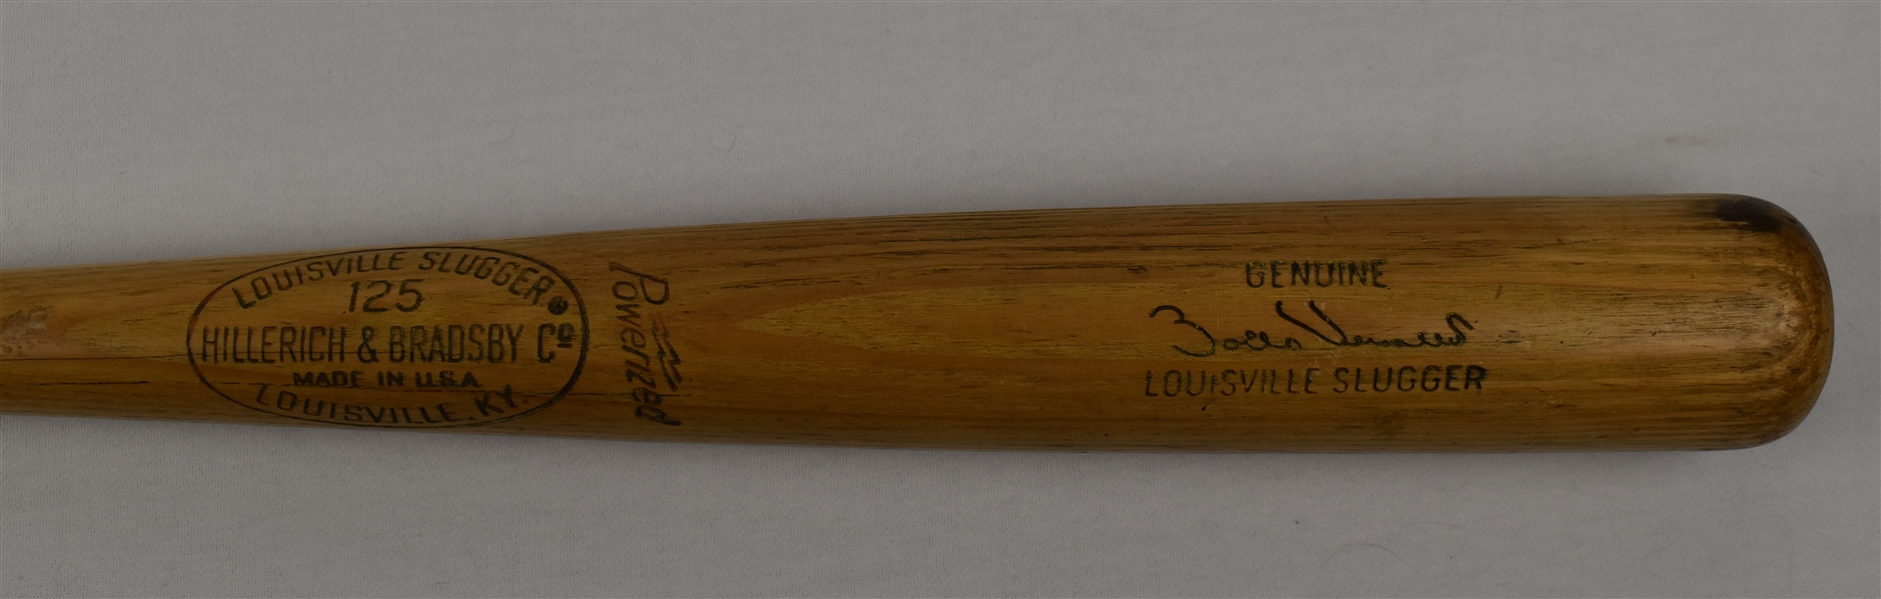 Zoilo Versalles c. 1965-67 Minnesota Twins Game Used & Autographed Bat 